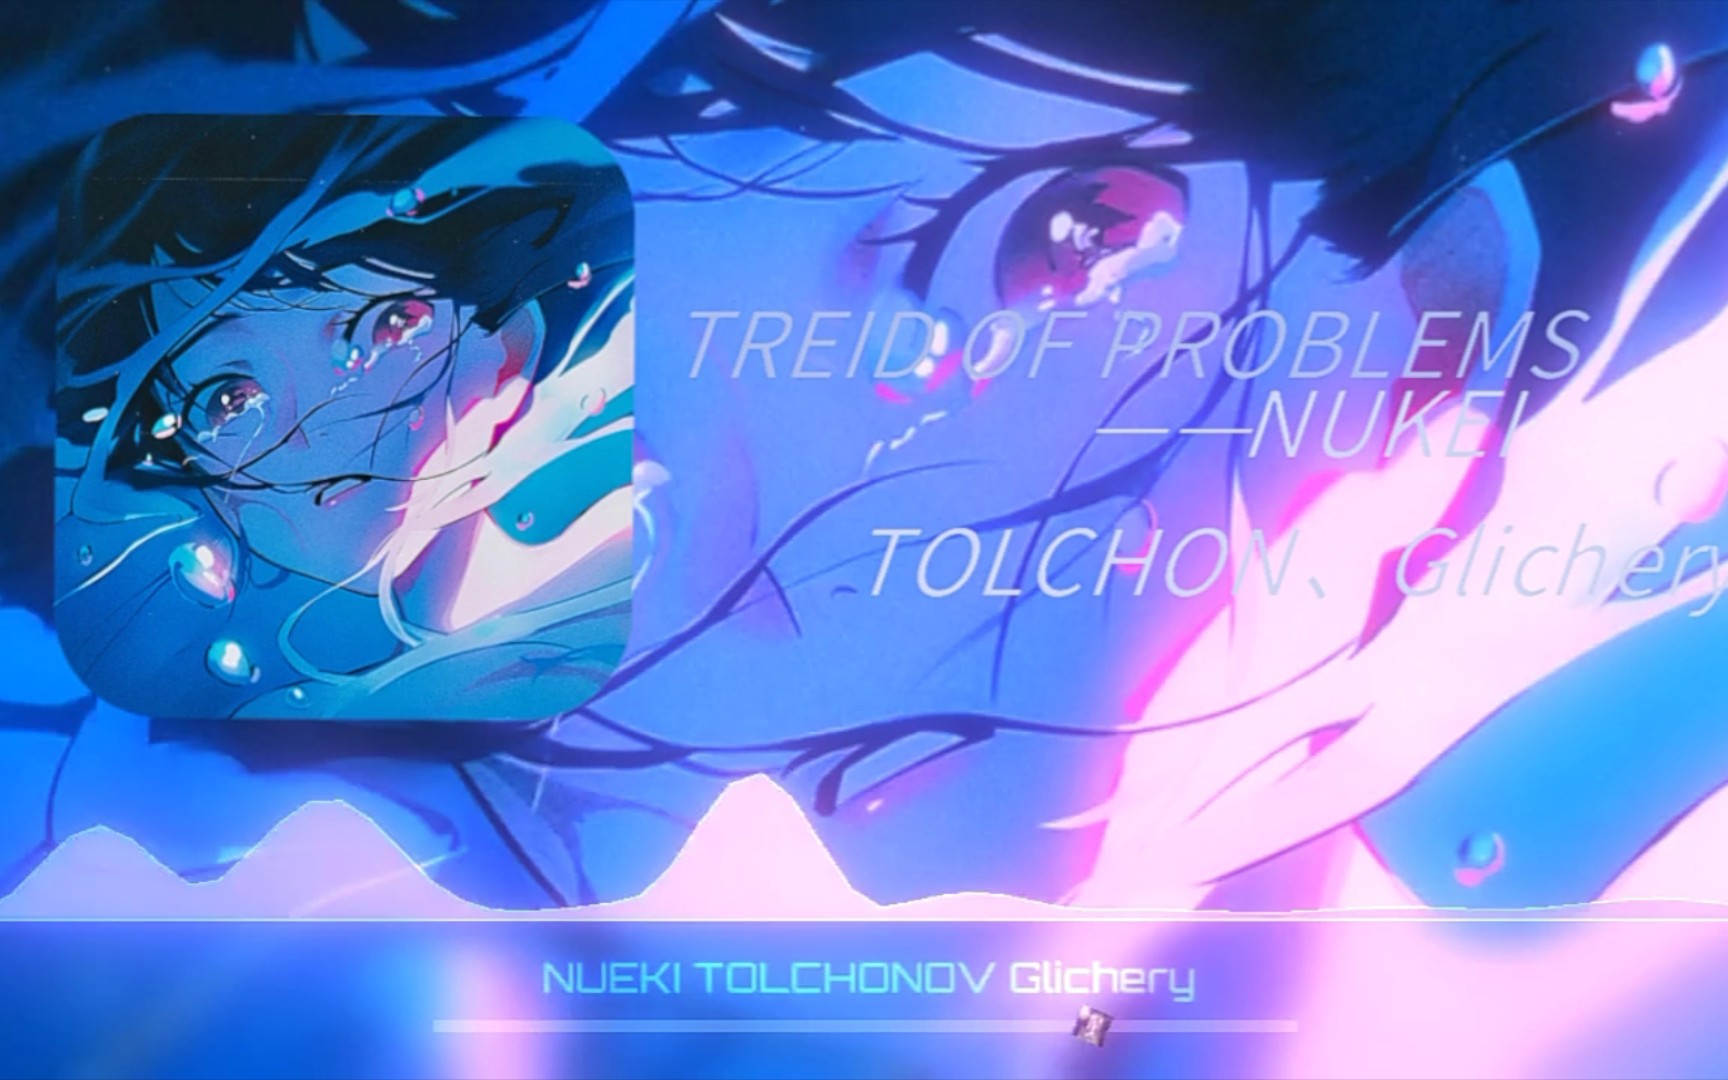 “tired+problems=？”〖PHONK〗TIRED OF PROBLEMS——NUKEI、TOLCHON、Glivhery